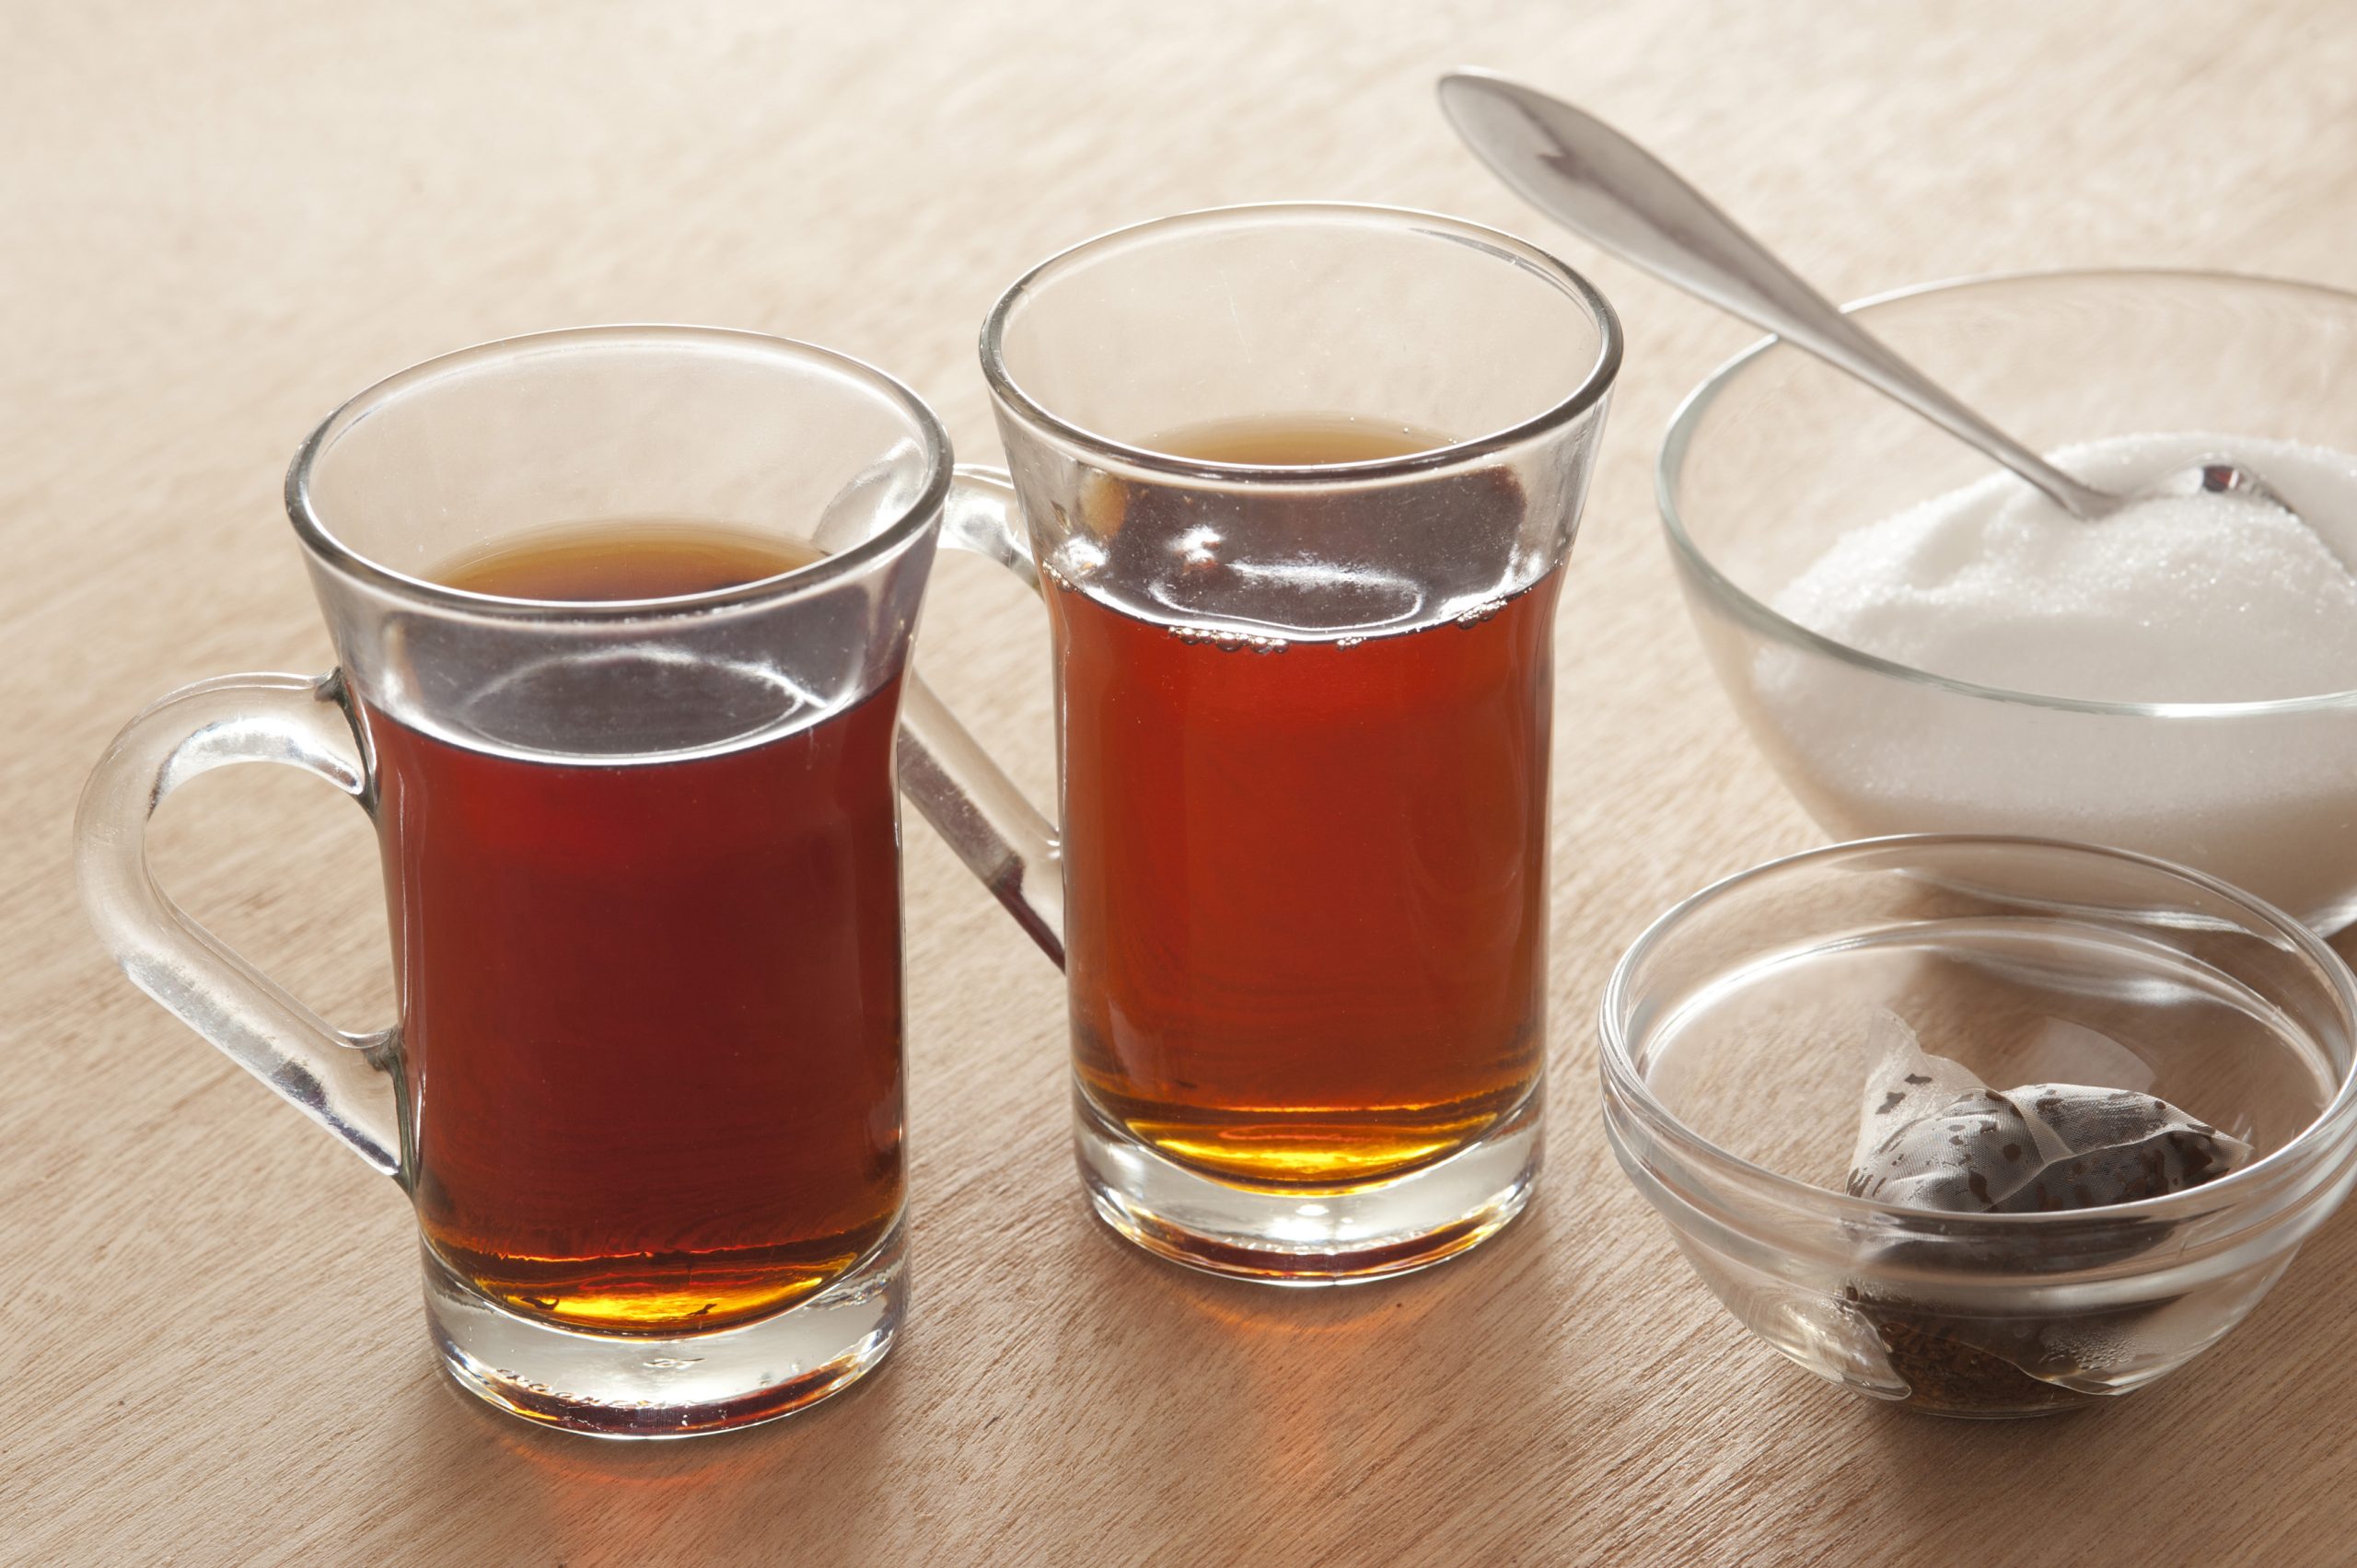 Hot black tea for two served in glass mugs with a bowl of sugar and the used teabags in a small dish